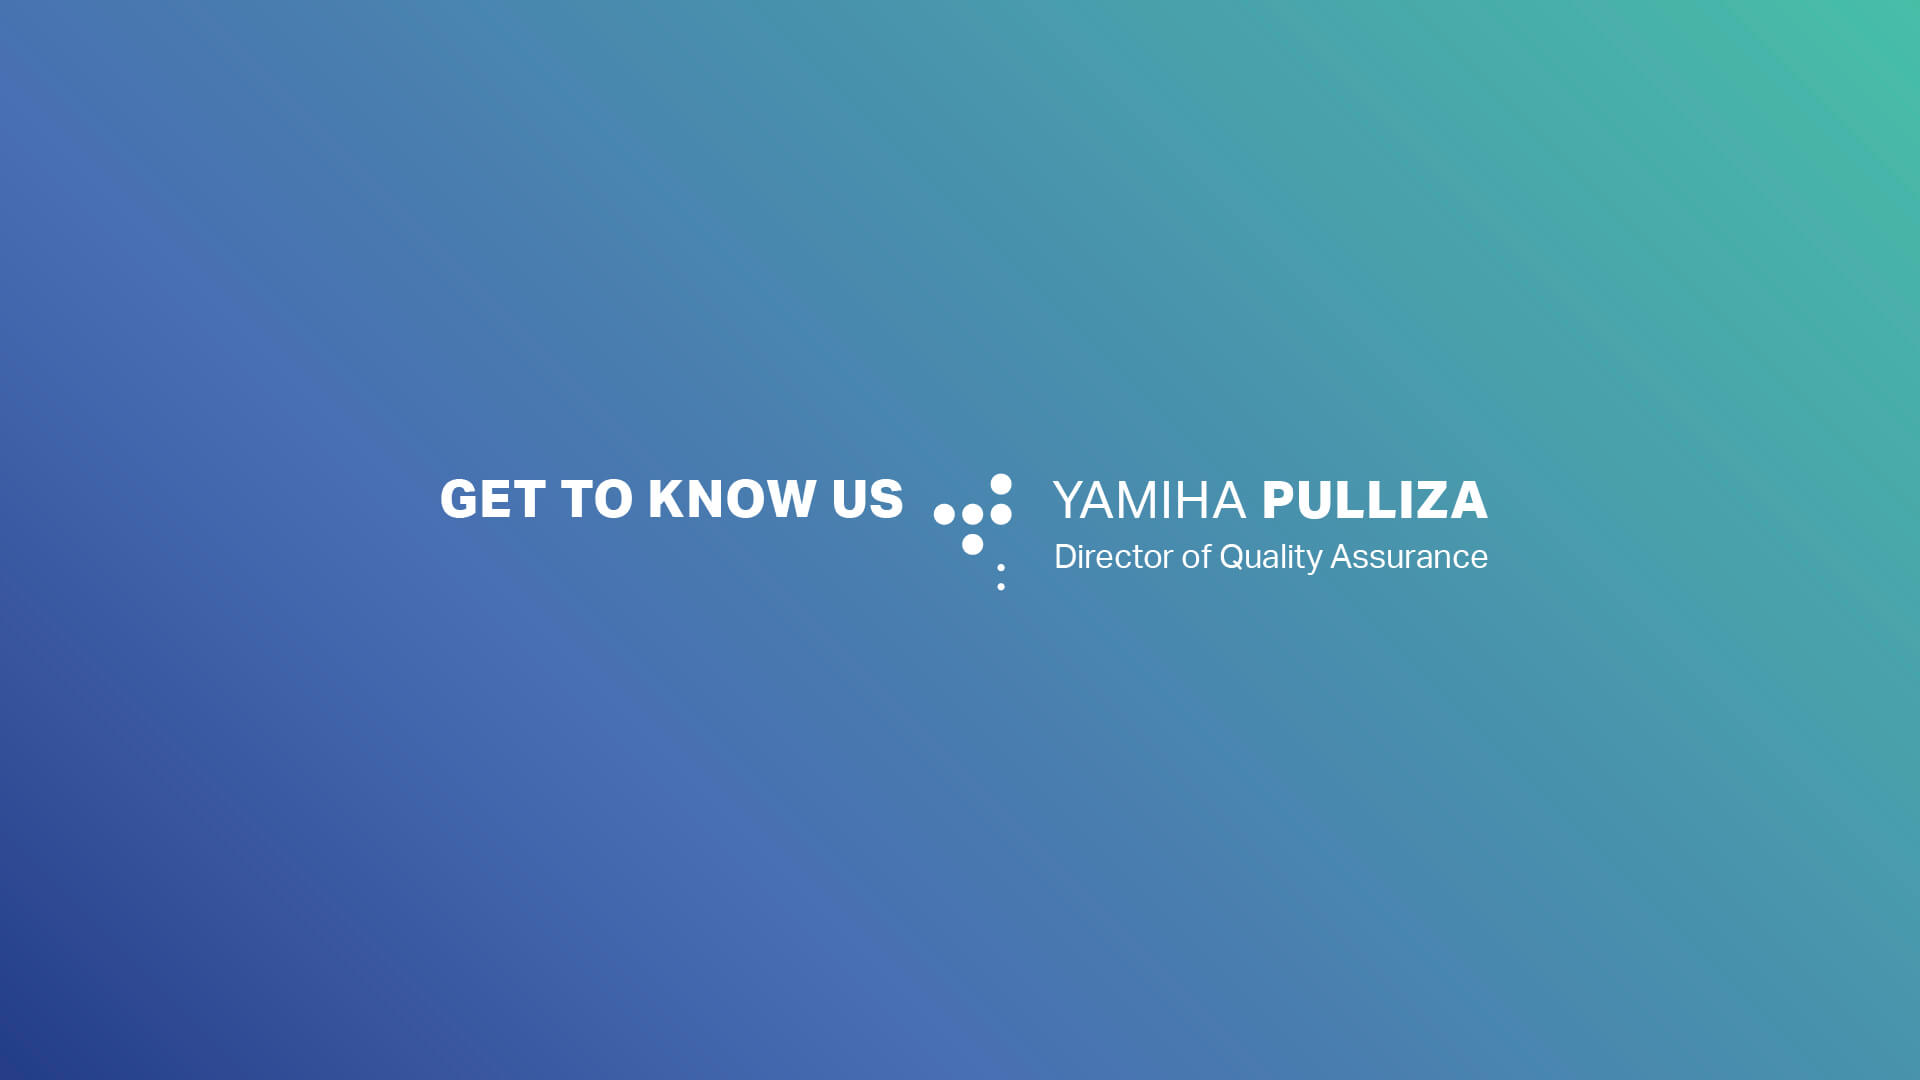 Get to Know Us: Yamiha Pulliza, Director of Quality Assurance